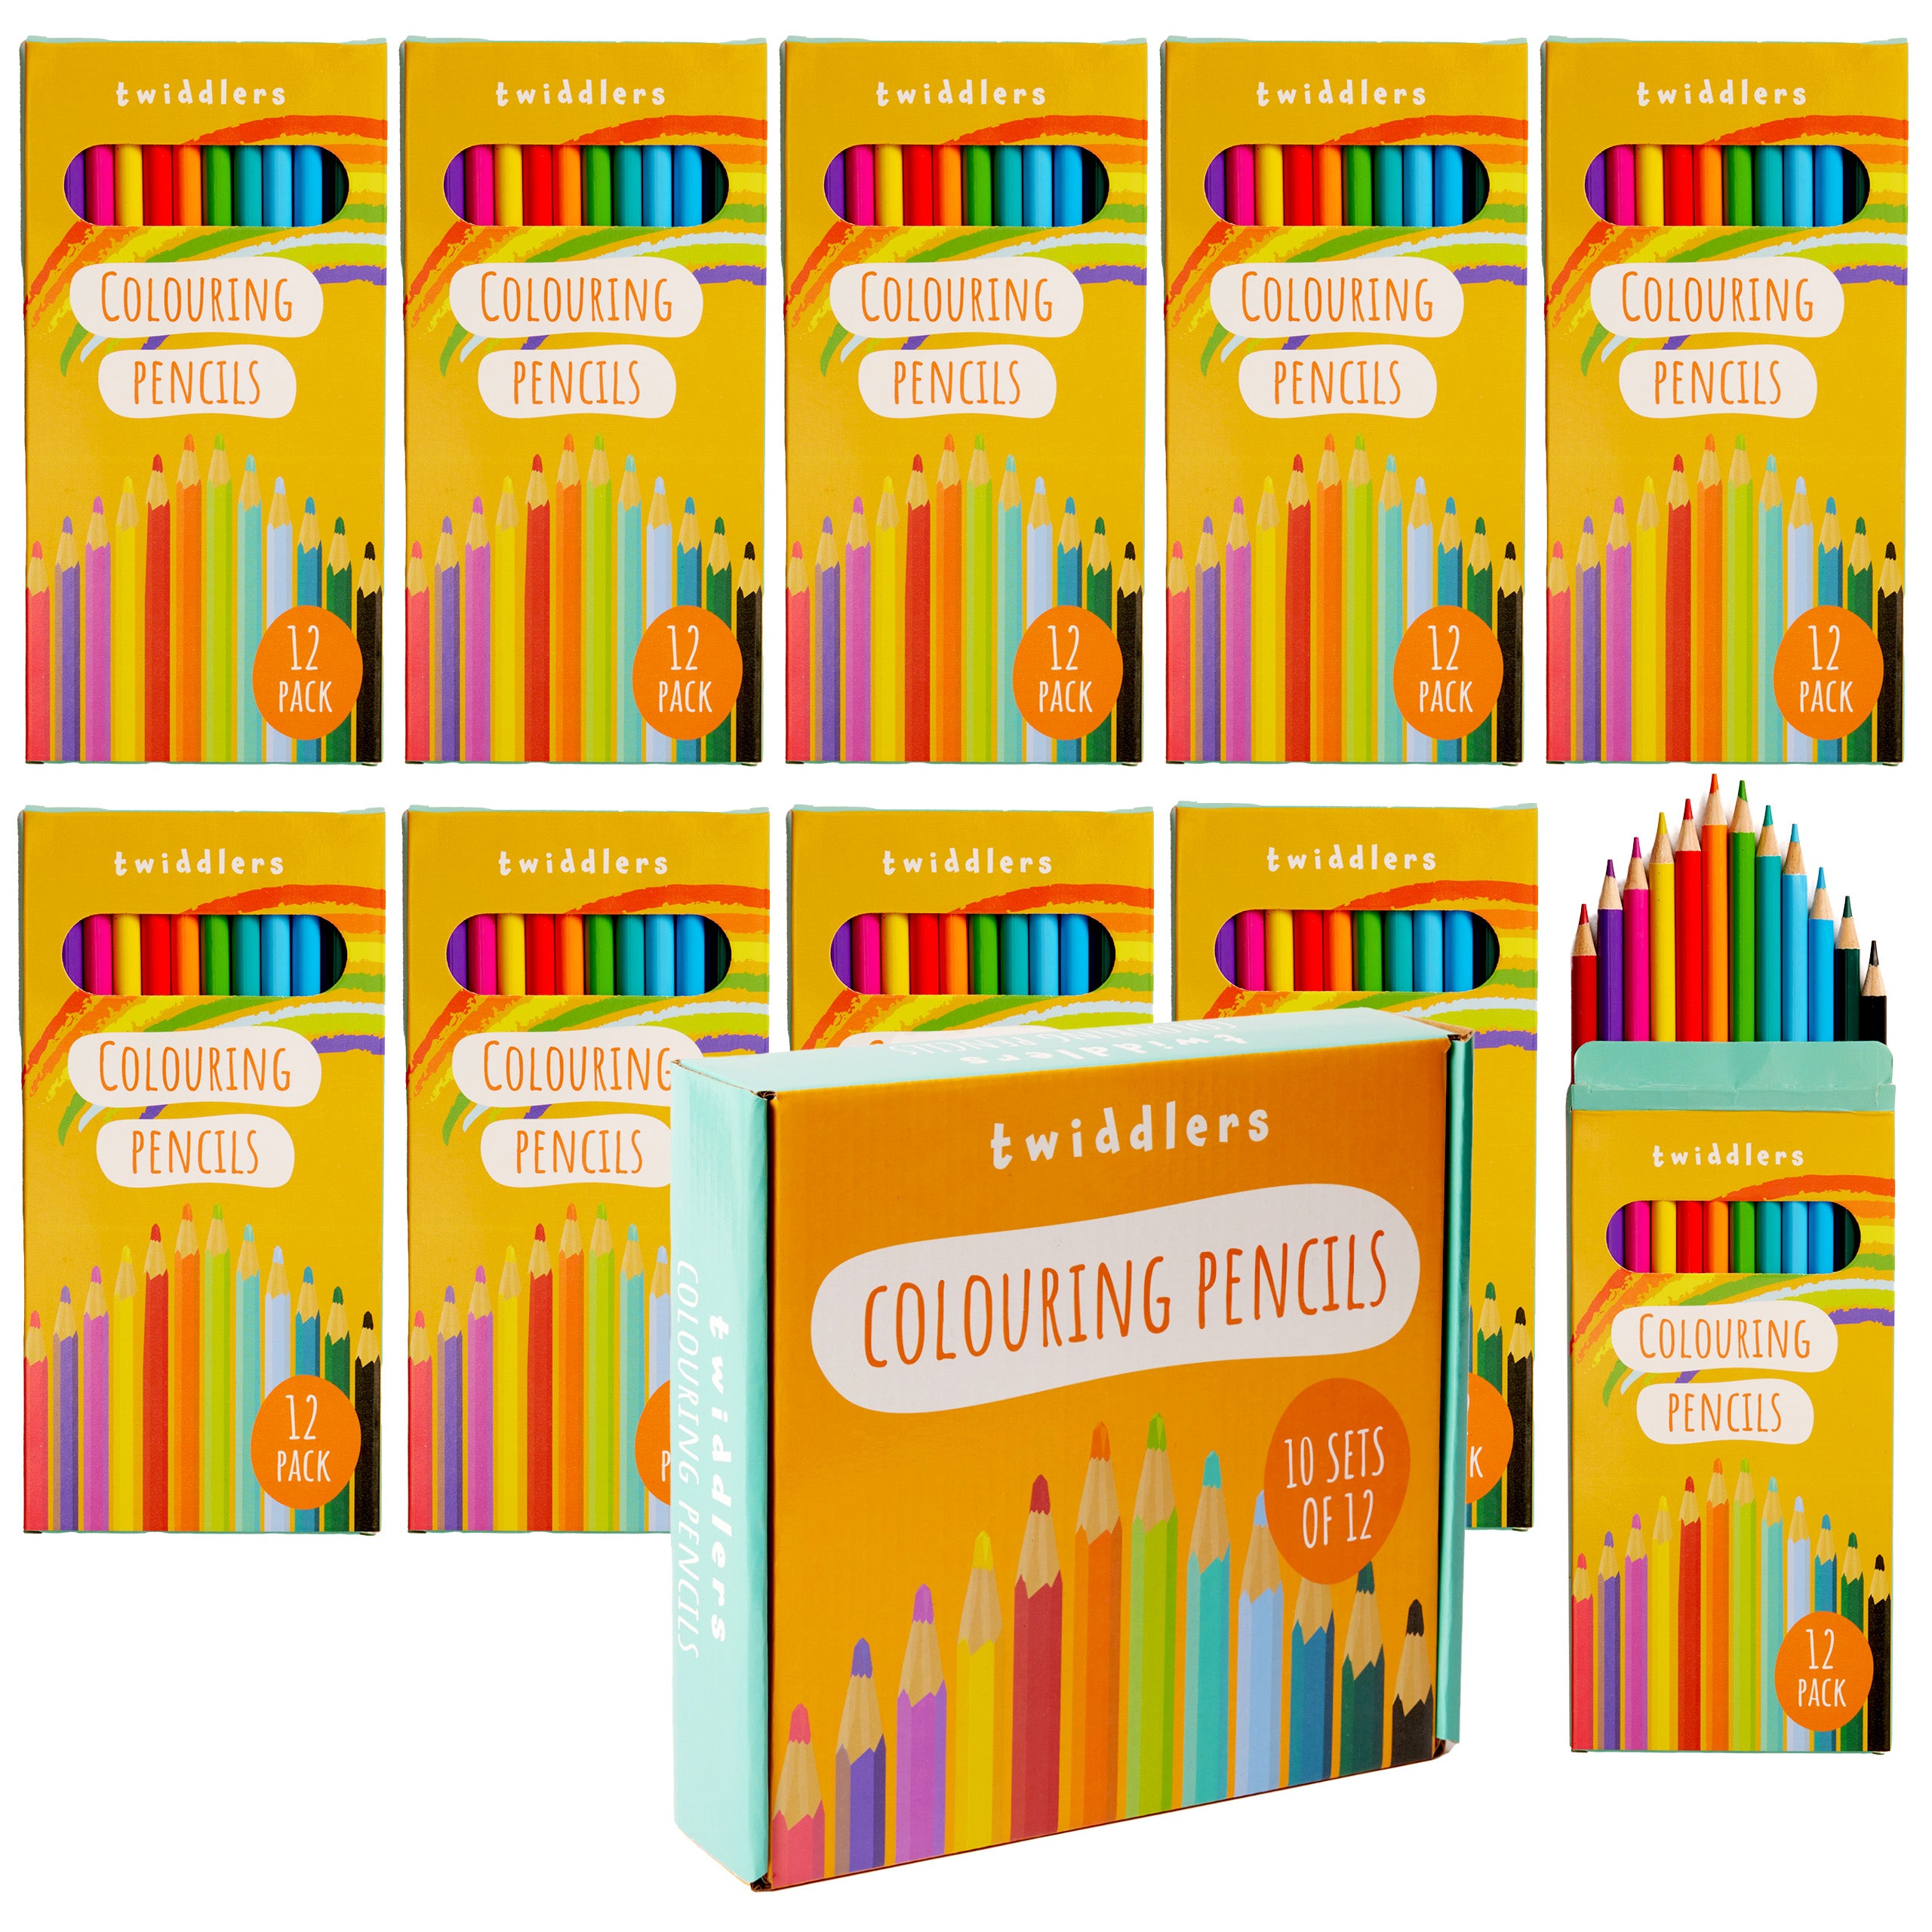 10 Packs of 12 Colouring Pencils